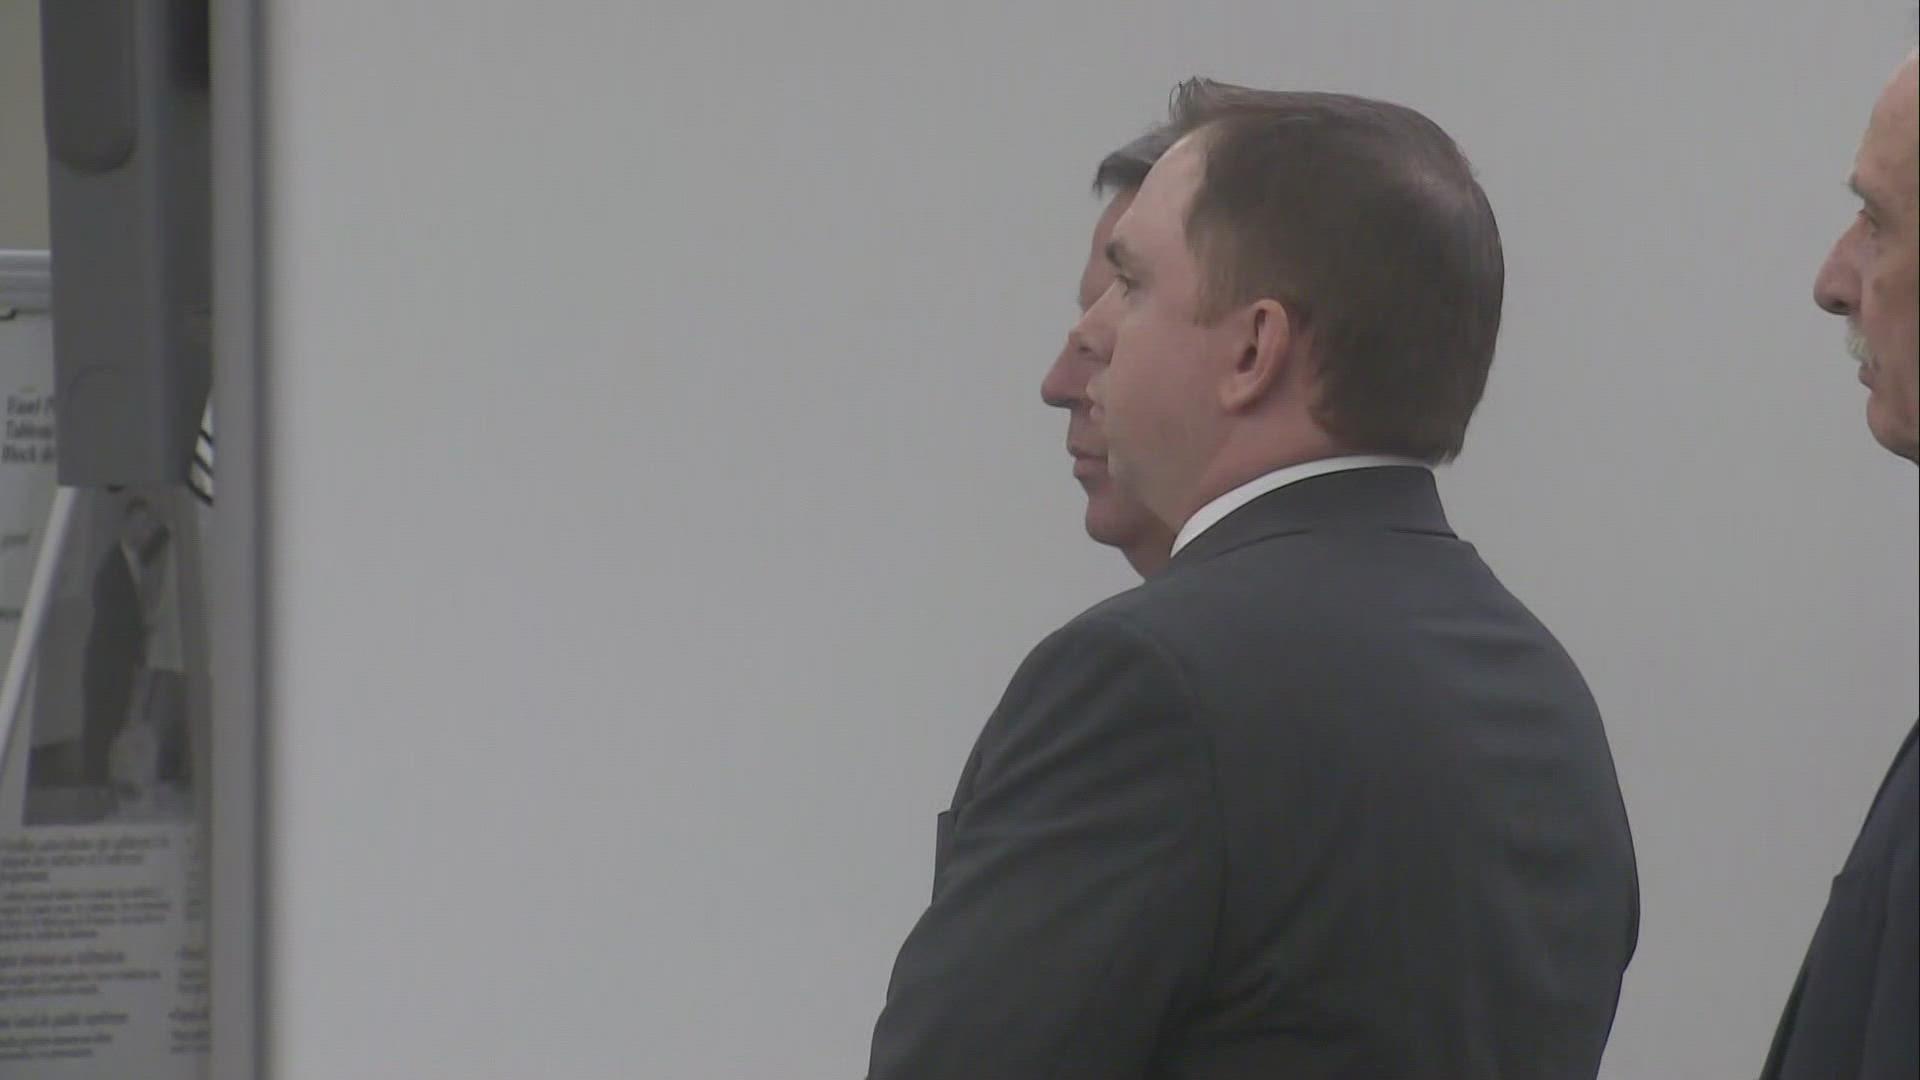 After five days of testimony and over 13 hours of deliberation, the jury returned with a verdict Thursday. The jury was considering murder or manslaughter.